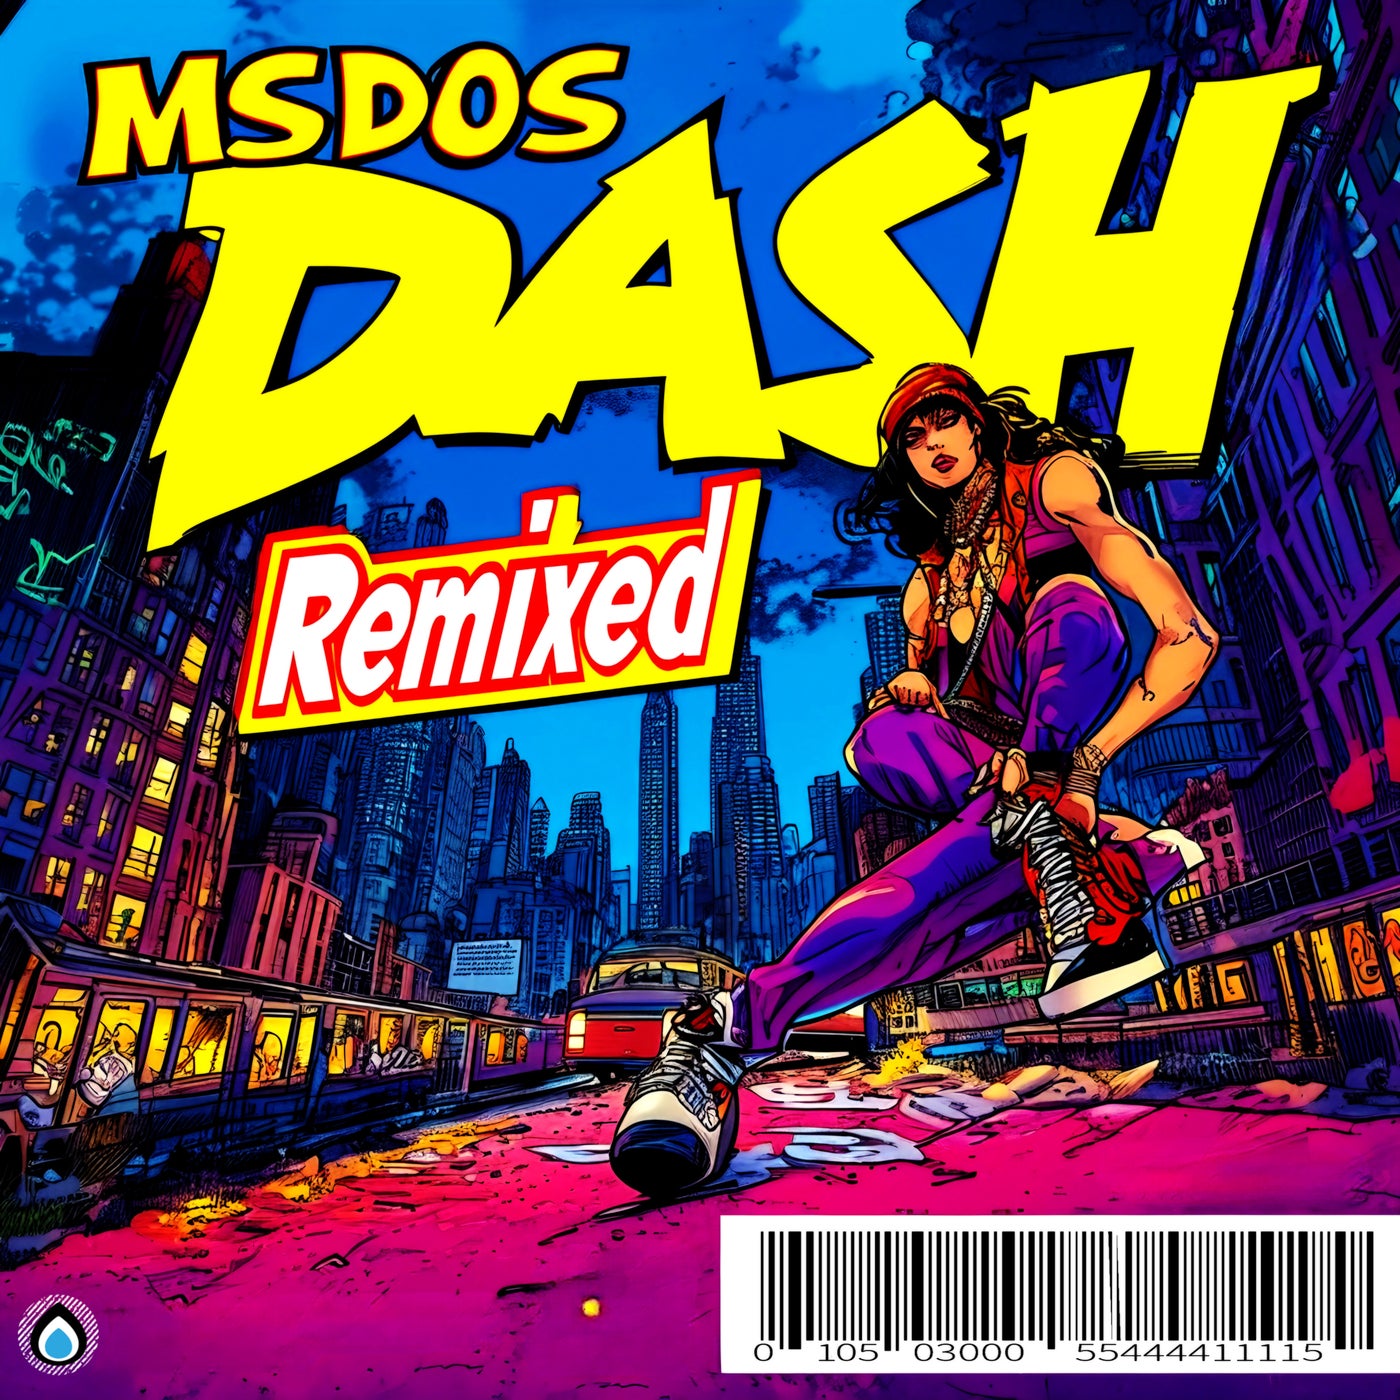 Remixed by Dash